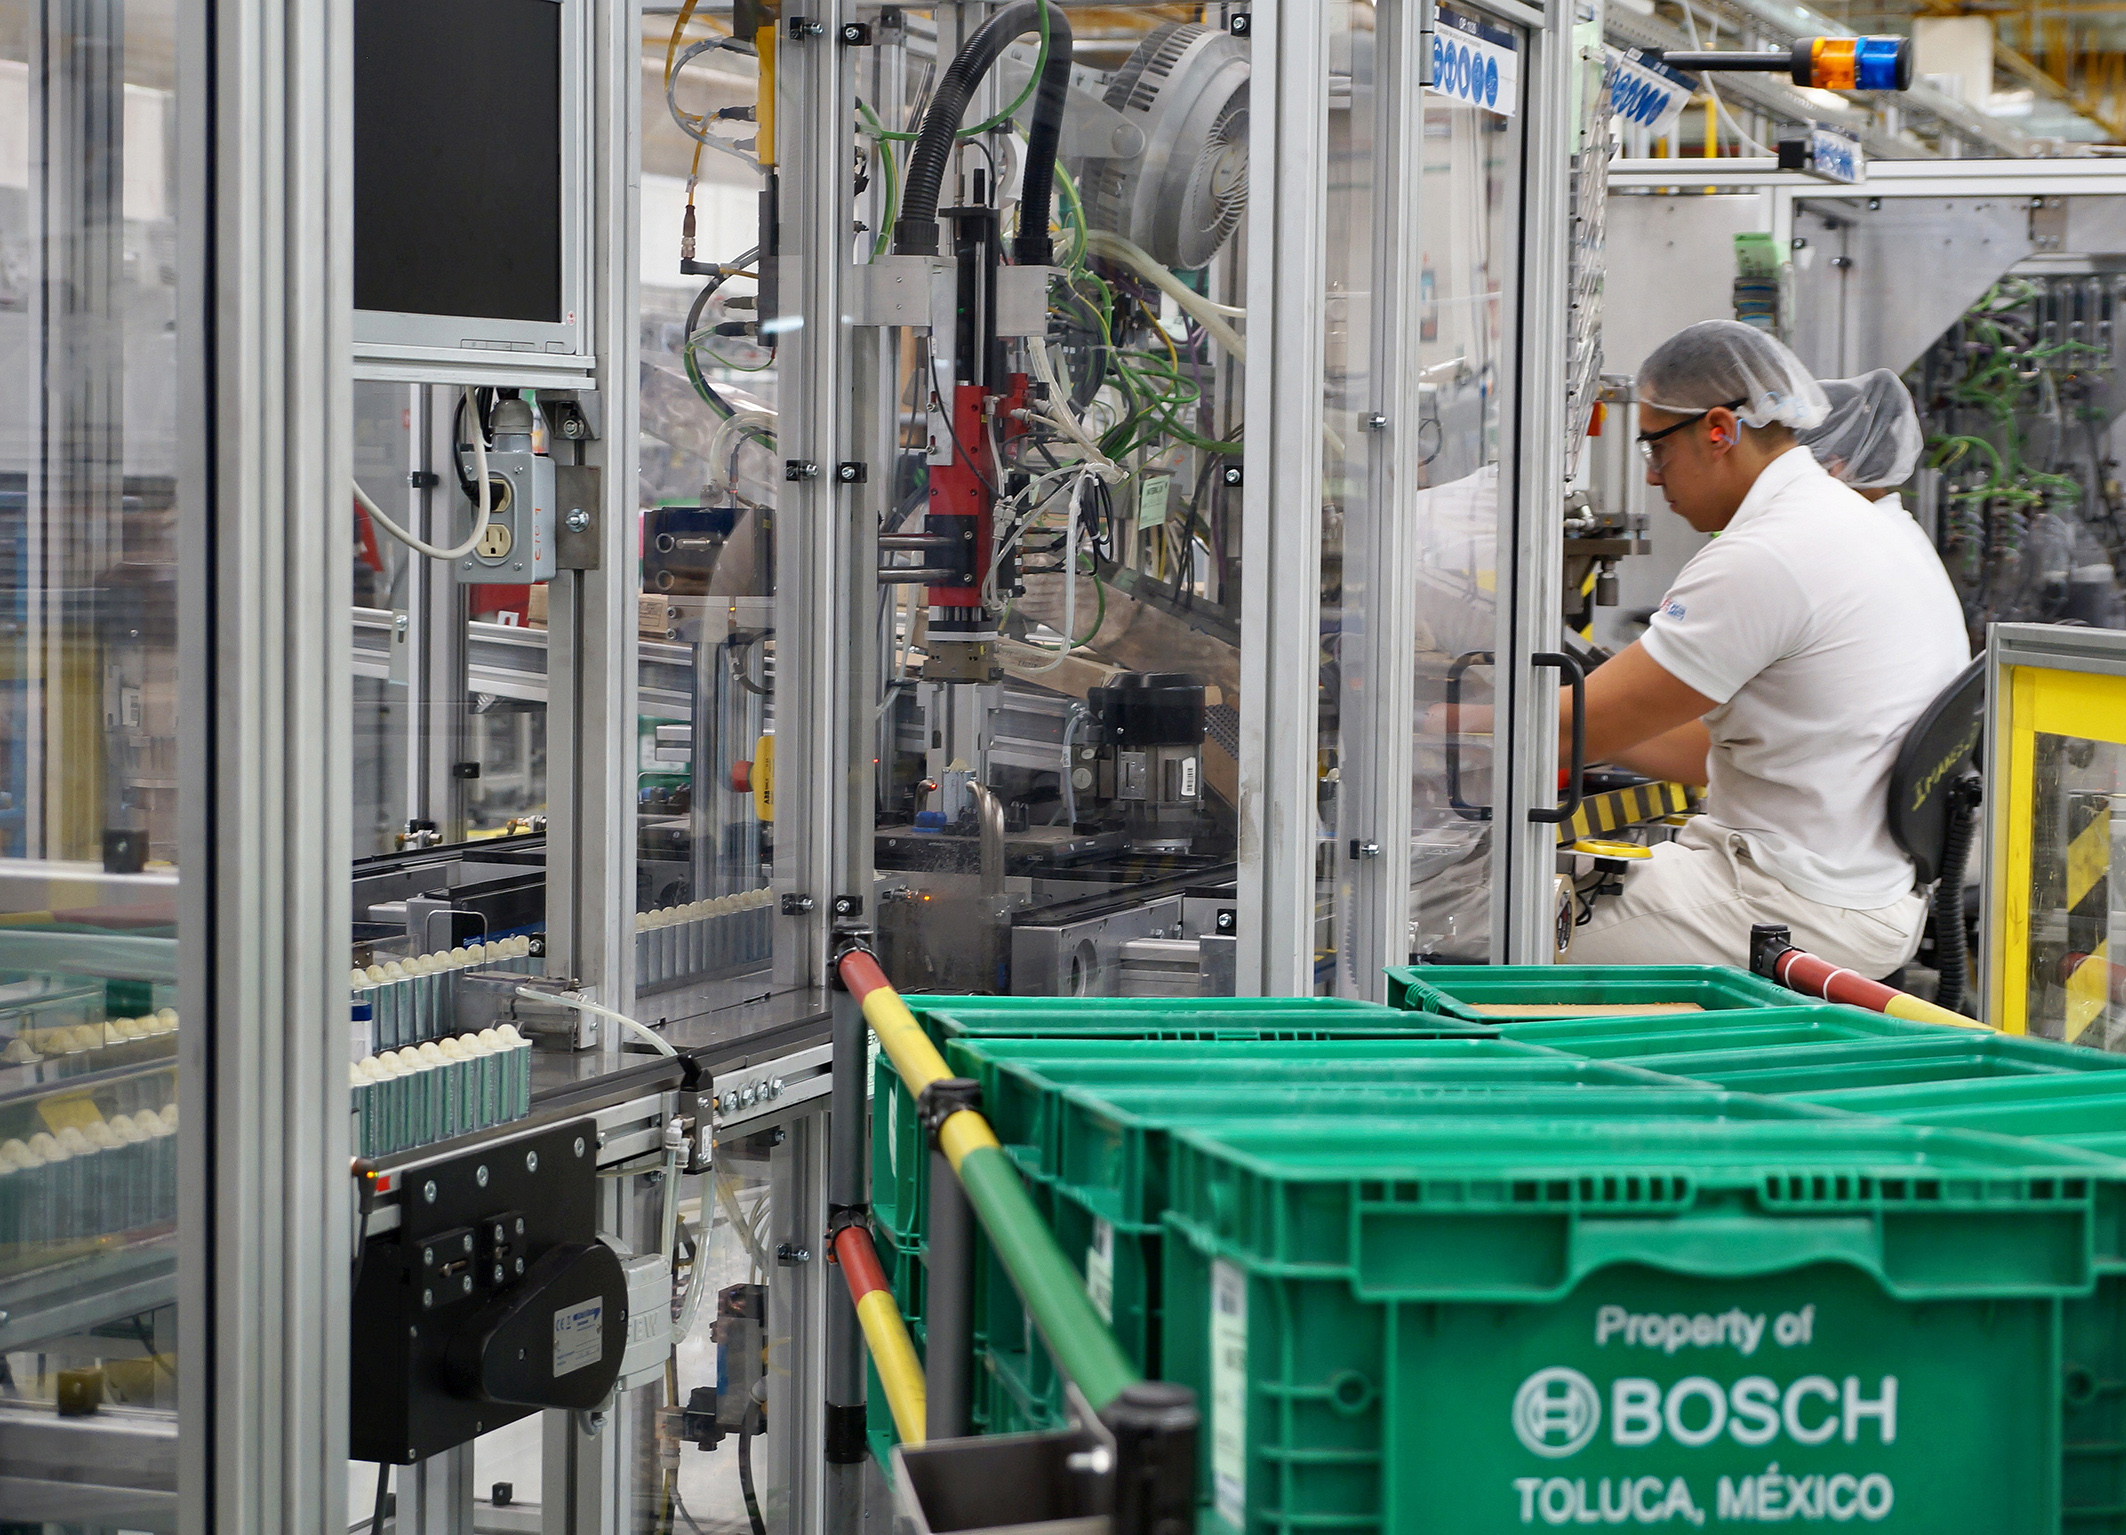 Bosch is present with in Mexico with 16,000 associates at ten locations